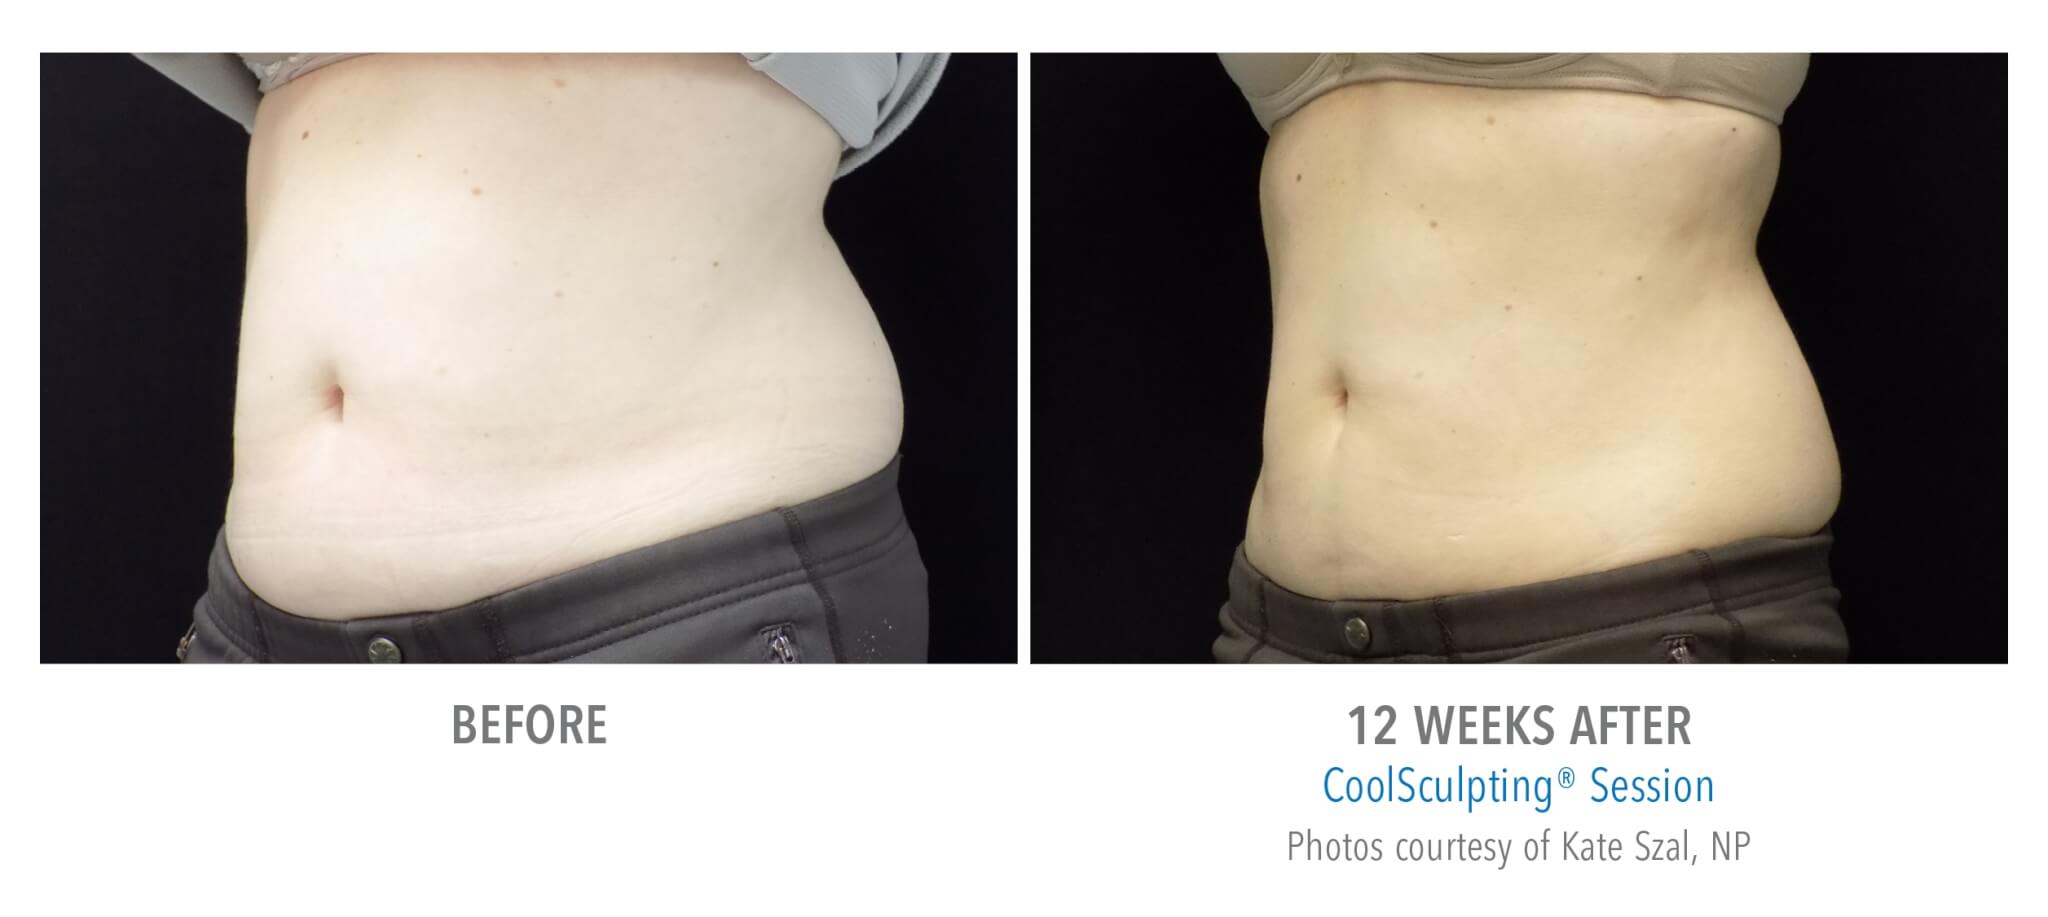 abdomen-angle coolsculpting patient before and after